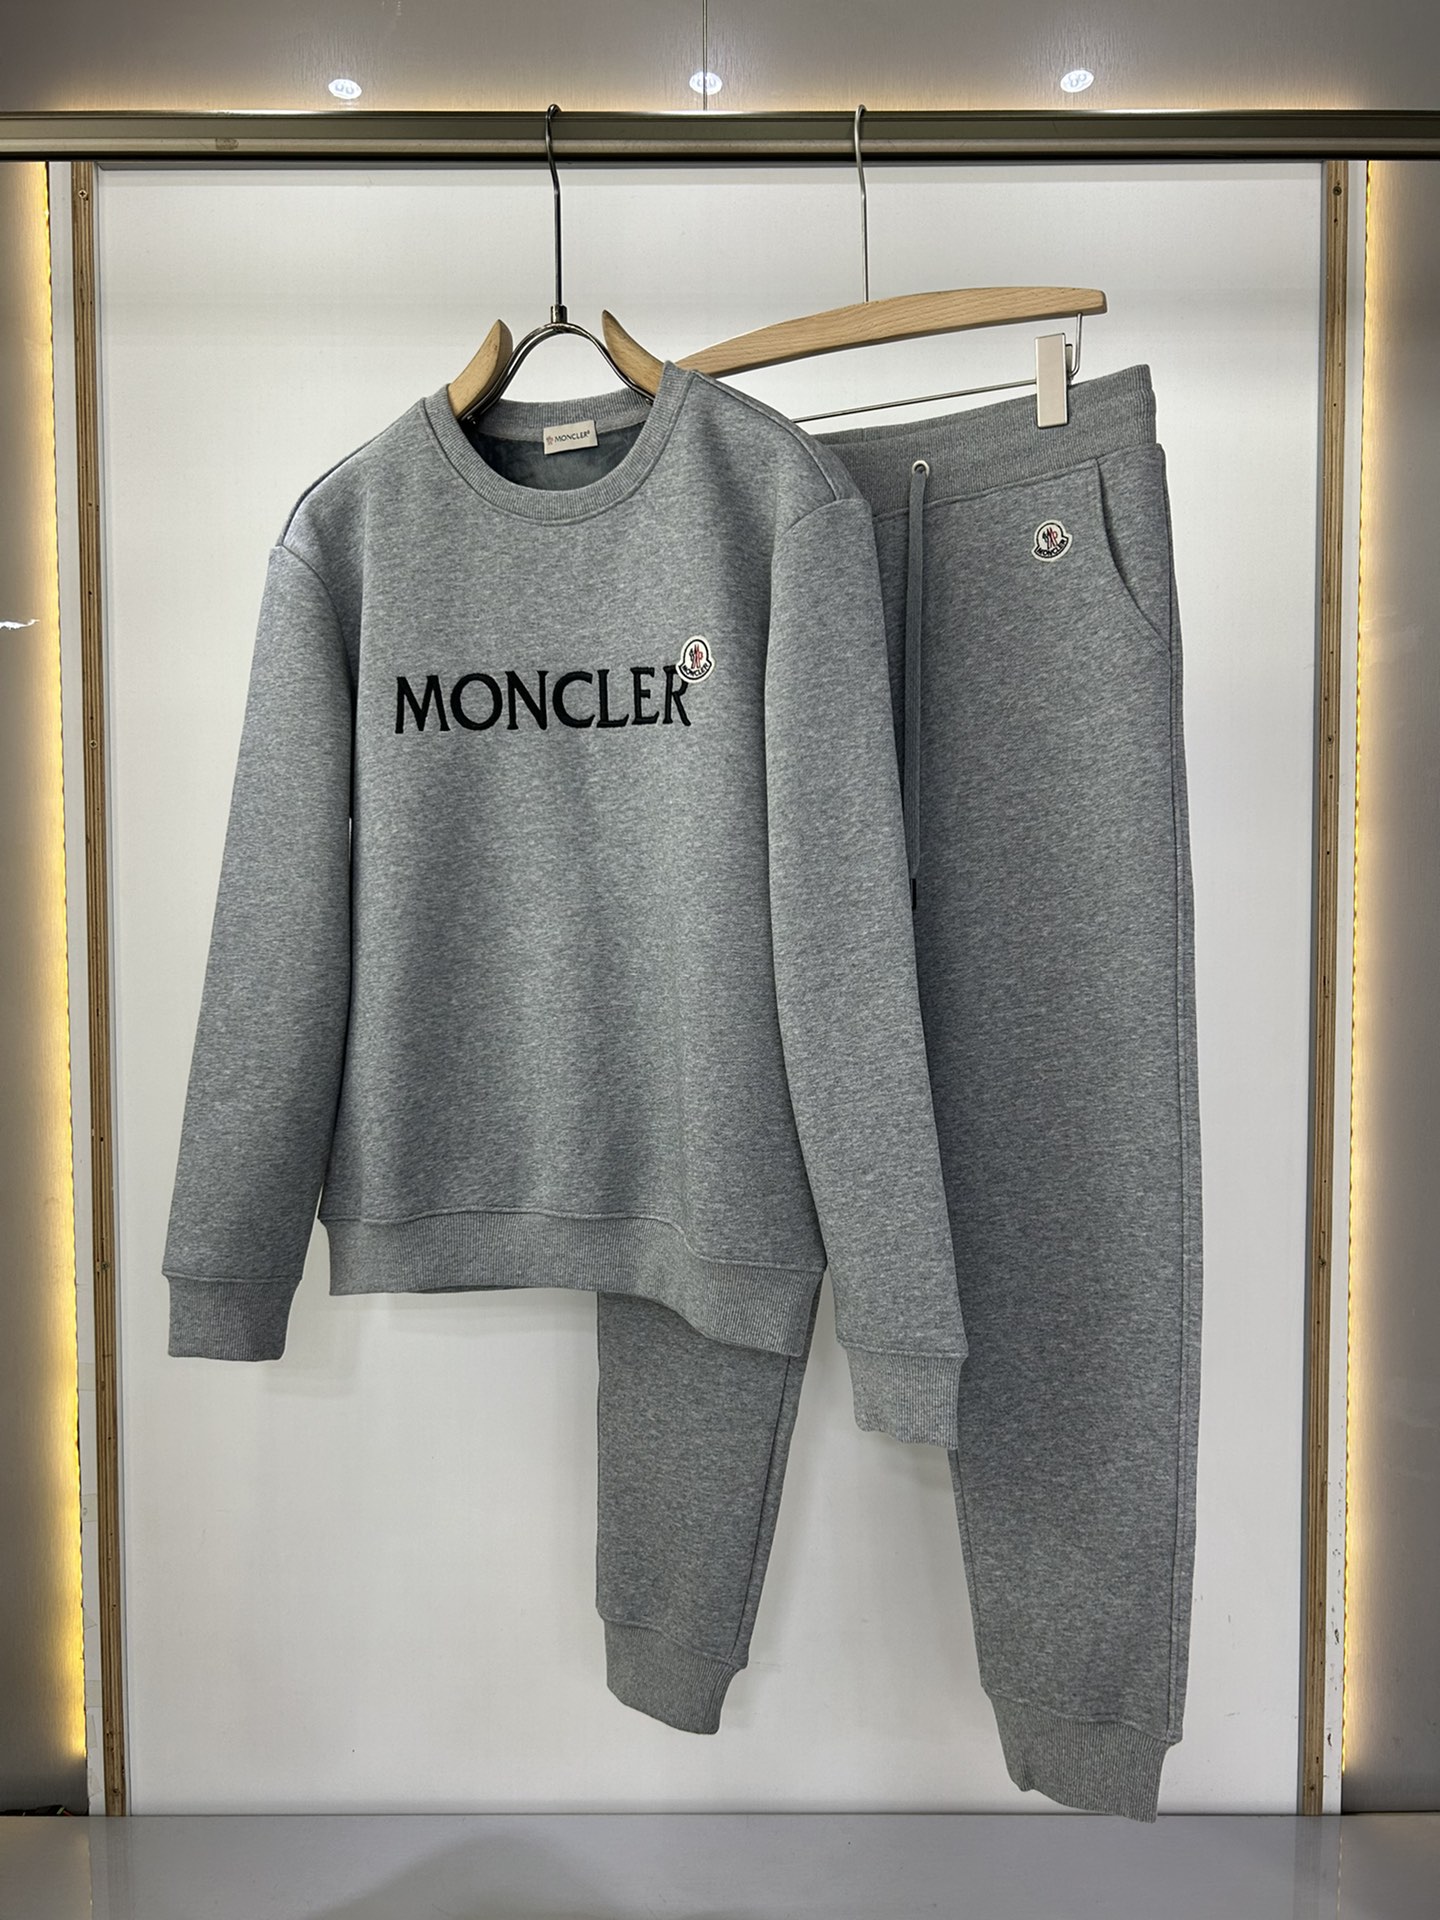 Moncler Clothing Pants & Trousers Unsurpassed Quality
 Fall/Winter Collection Fashion Sweatpants